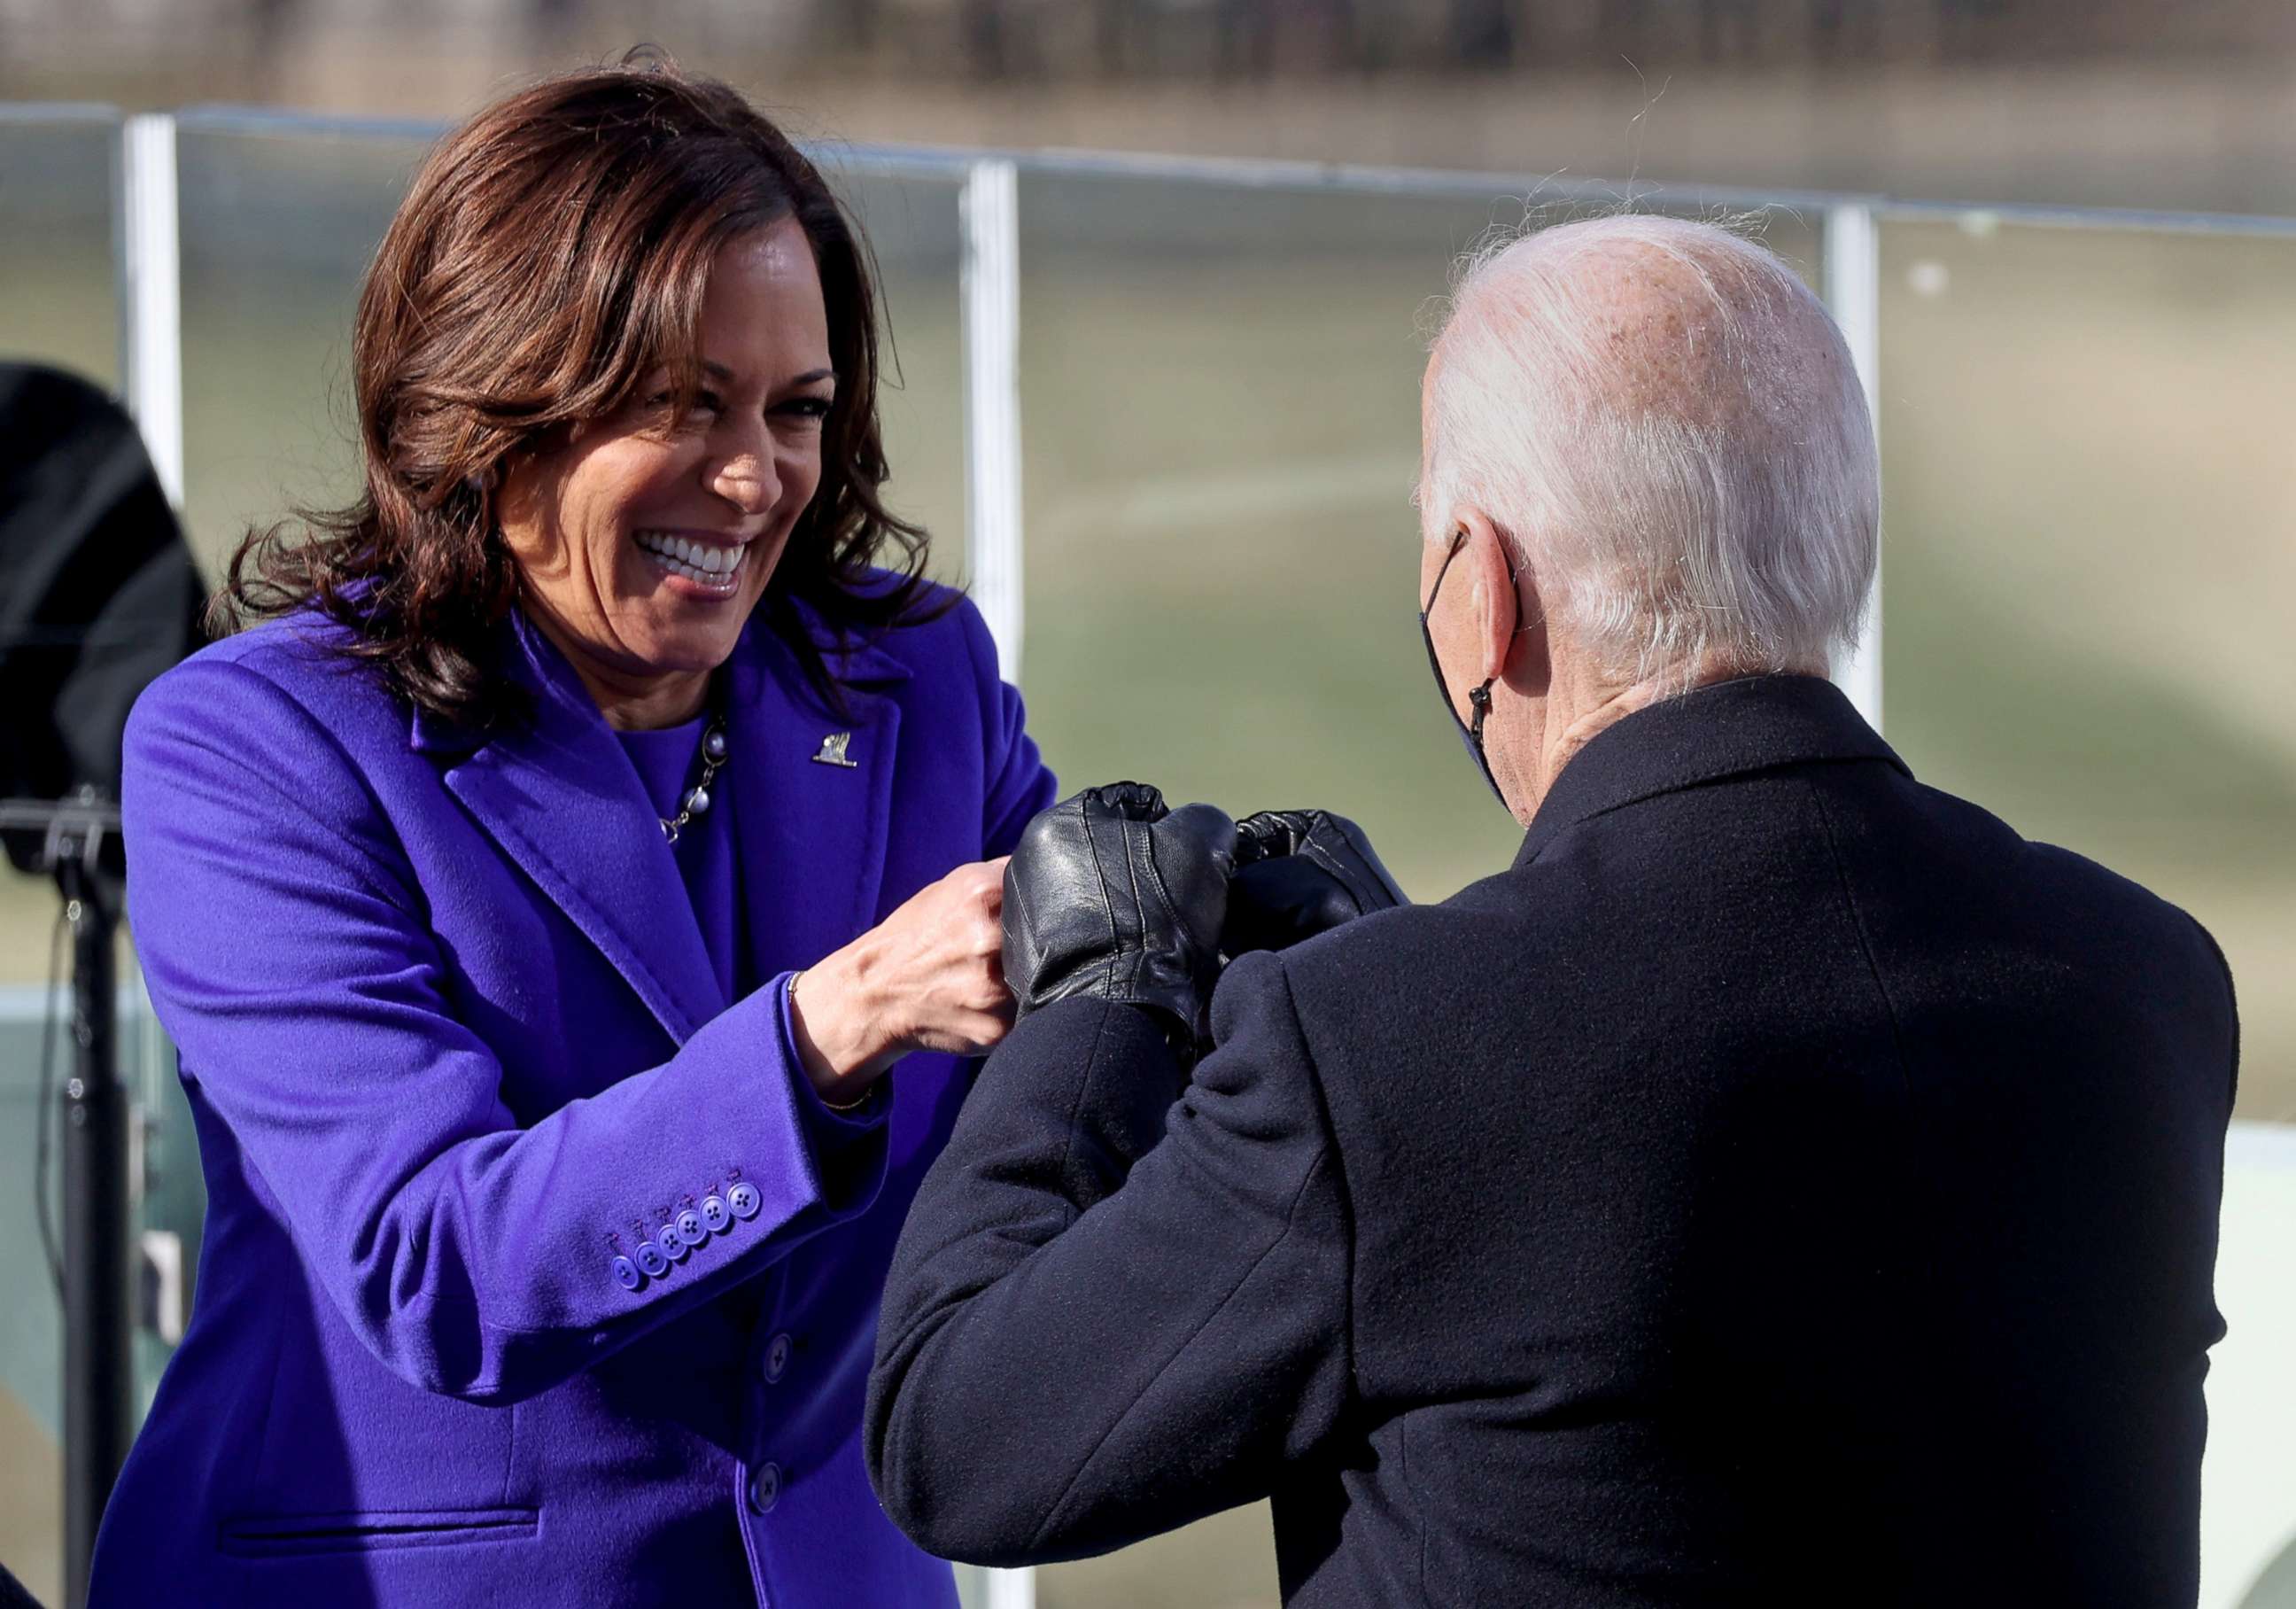 PHOTO: Kamala Harris bumps fists with Joe Biden after being sworn in as Vice President of the United States during the inauguration on the West Front of the U.S. Capitol in Washington, D.C., Jan. 20, 2021.